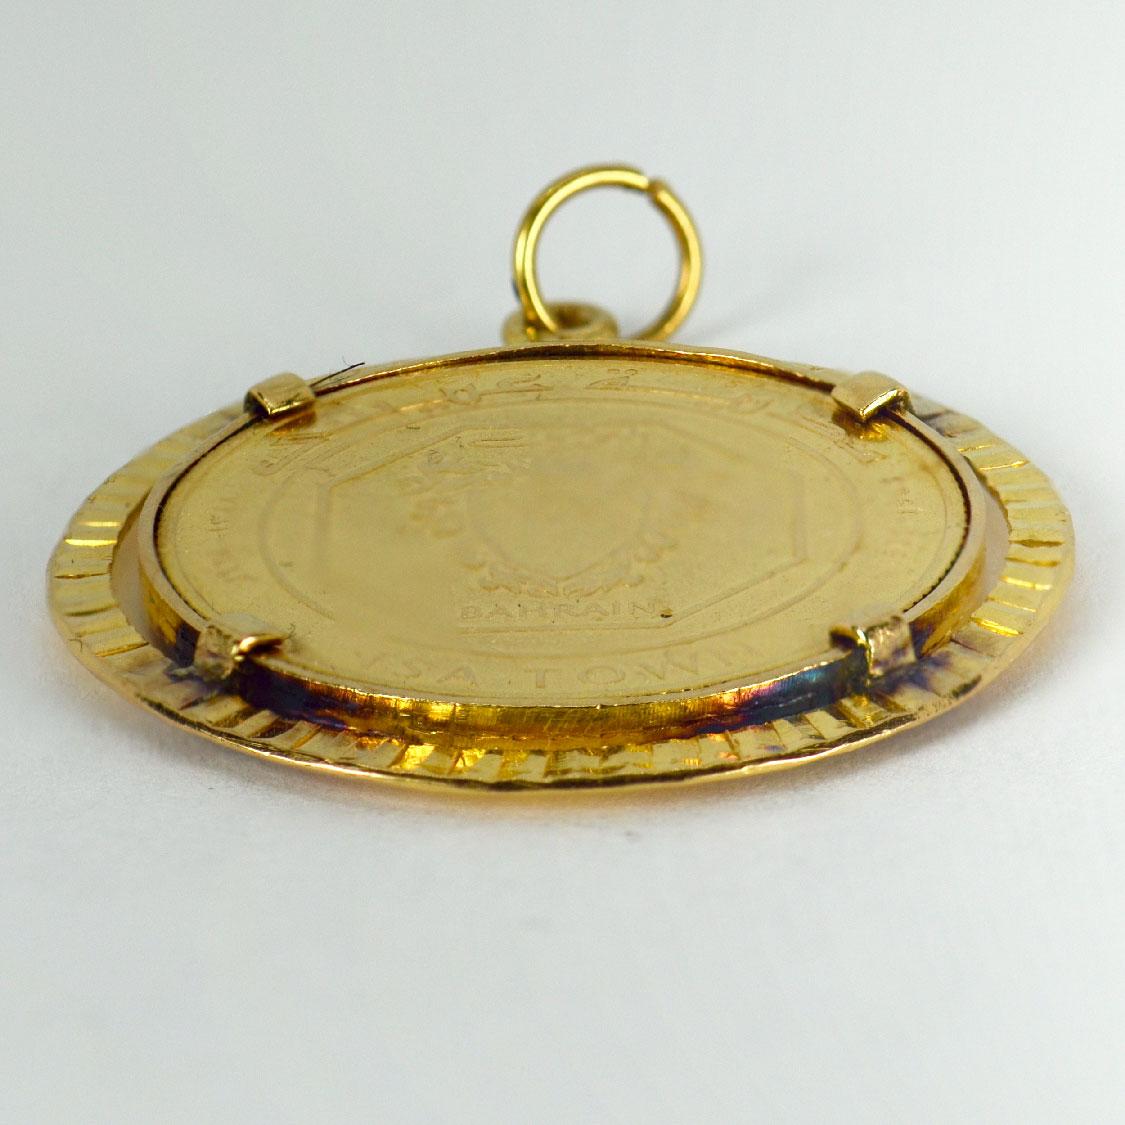 A yellow gold charm pendant designed as an 18 karat (18K)  coin holder containing a 24 karat (24K) Bahrain 10 Dinars gold coin. This rare coin was produced by the British Royal Mint in 1968 on behalf of the Middle Eastern country to mark the